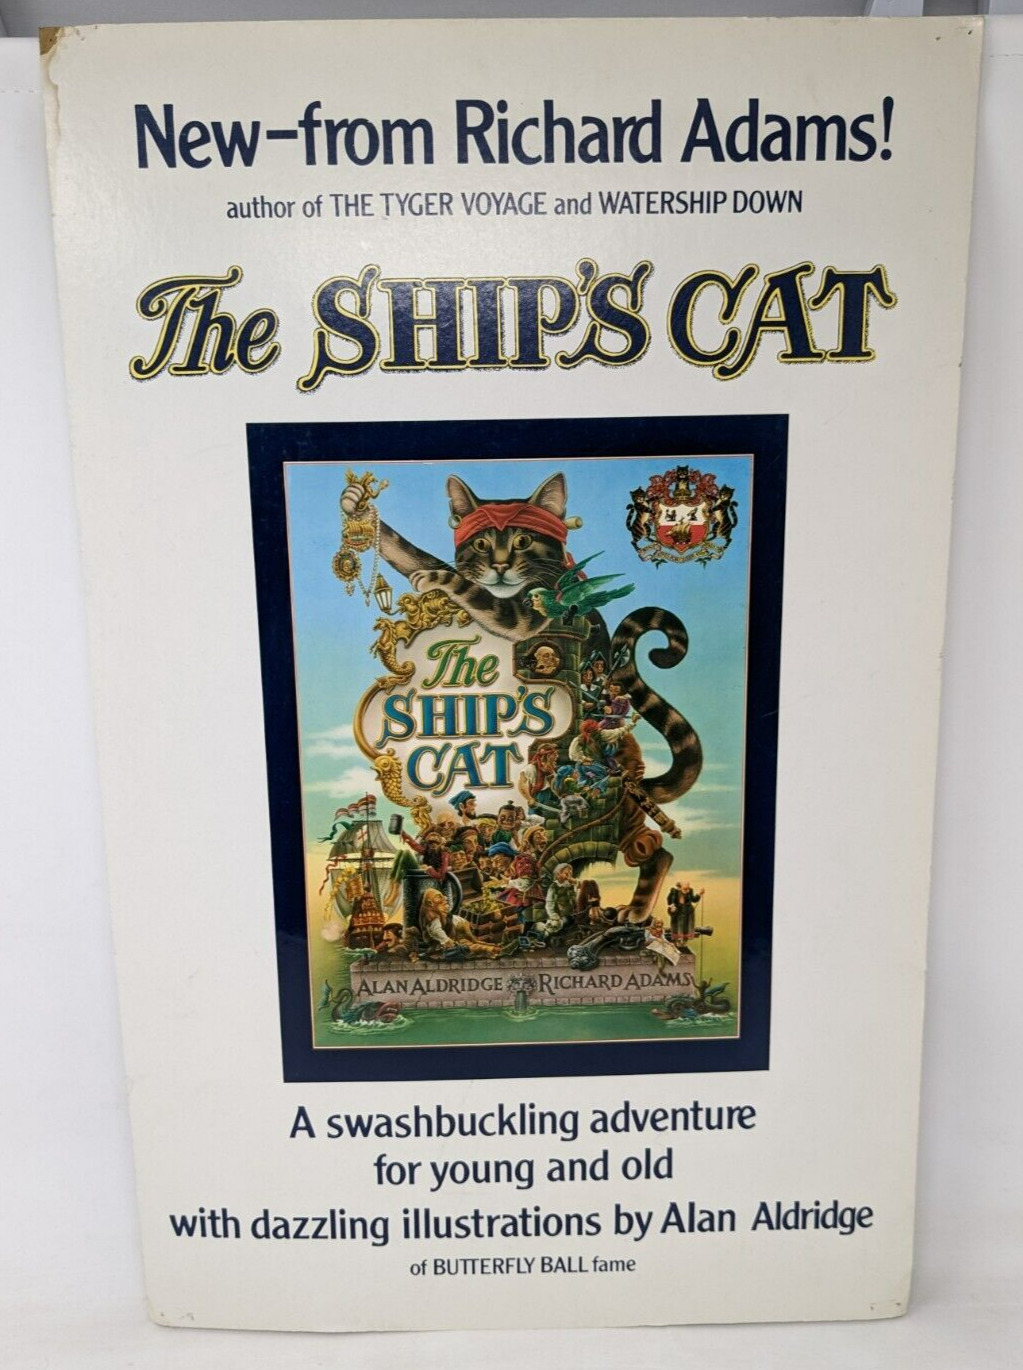 Richard Adams The Ship's Cat Watership Down Book Store Display Sign Standee VTG